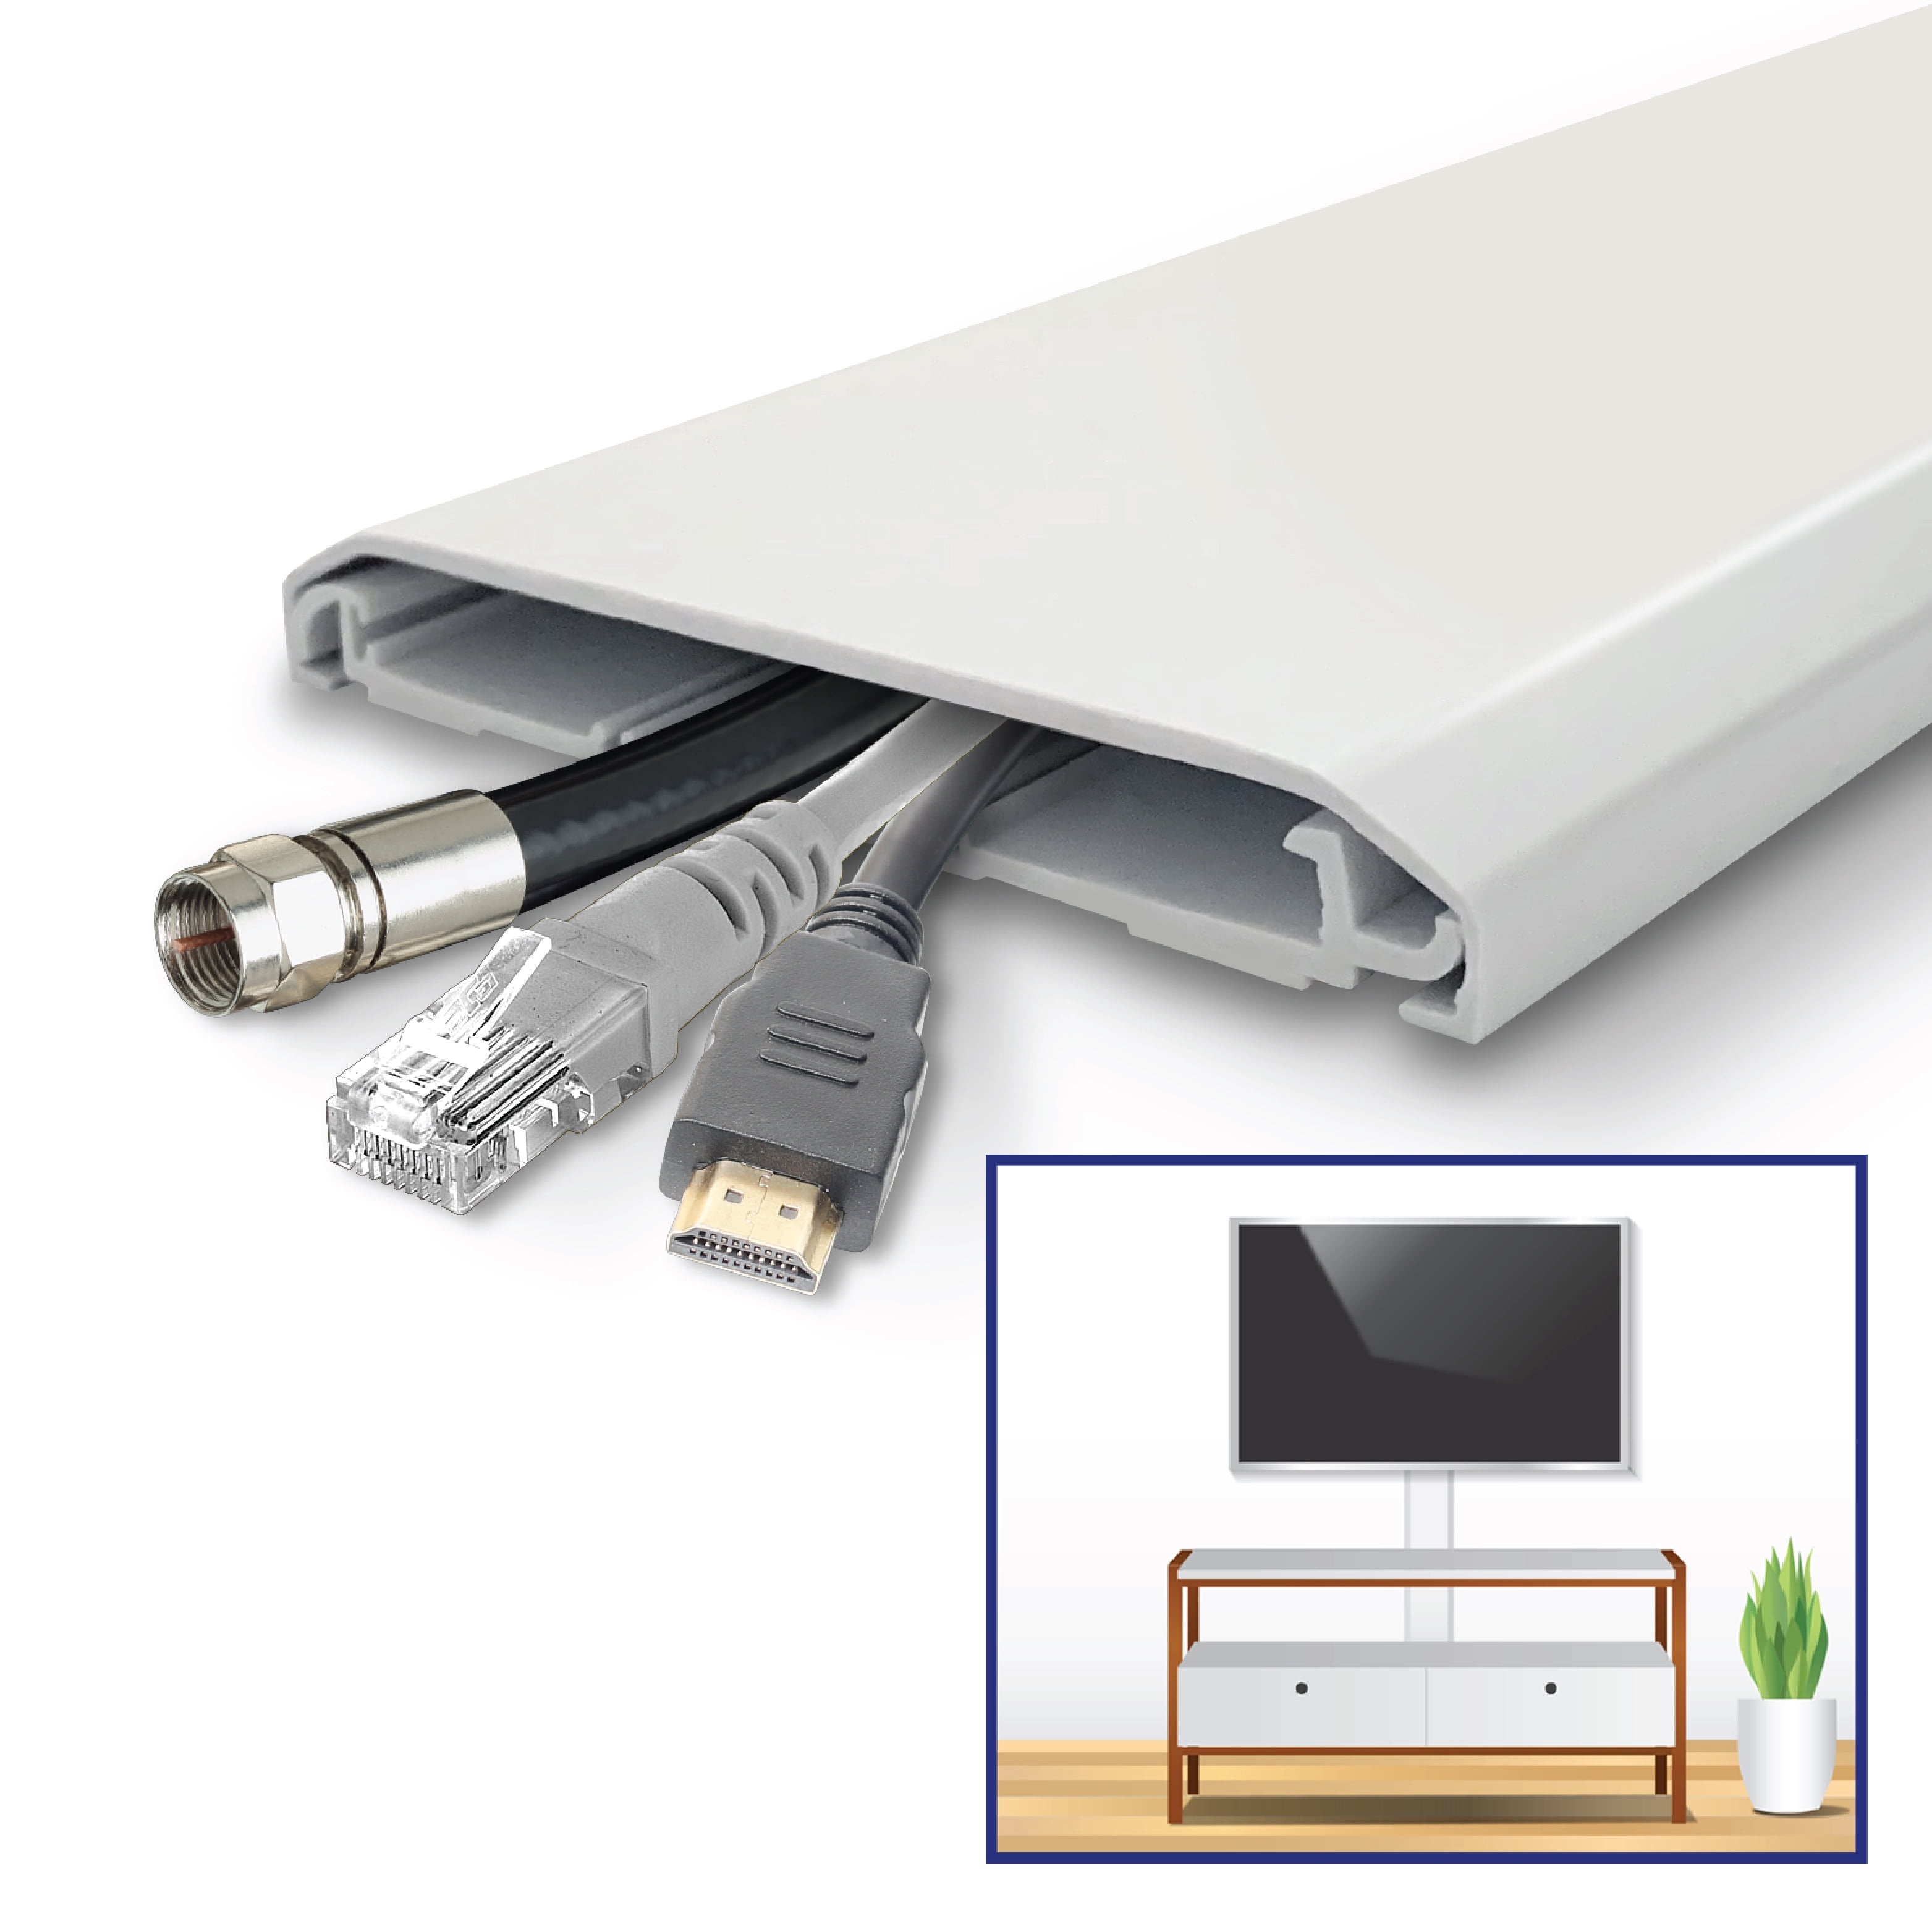 On-Wall Cable Concealer Kit Hides TV Cords, 4X 11 inch White Cable Raceways  Can Be Fit Together to Any Length for Home Theater, TV and Office